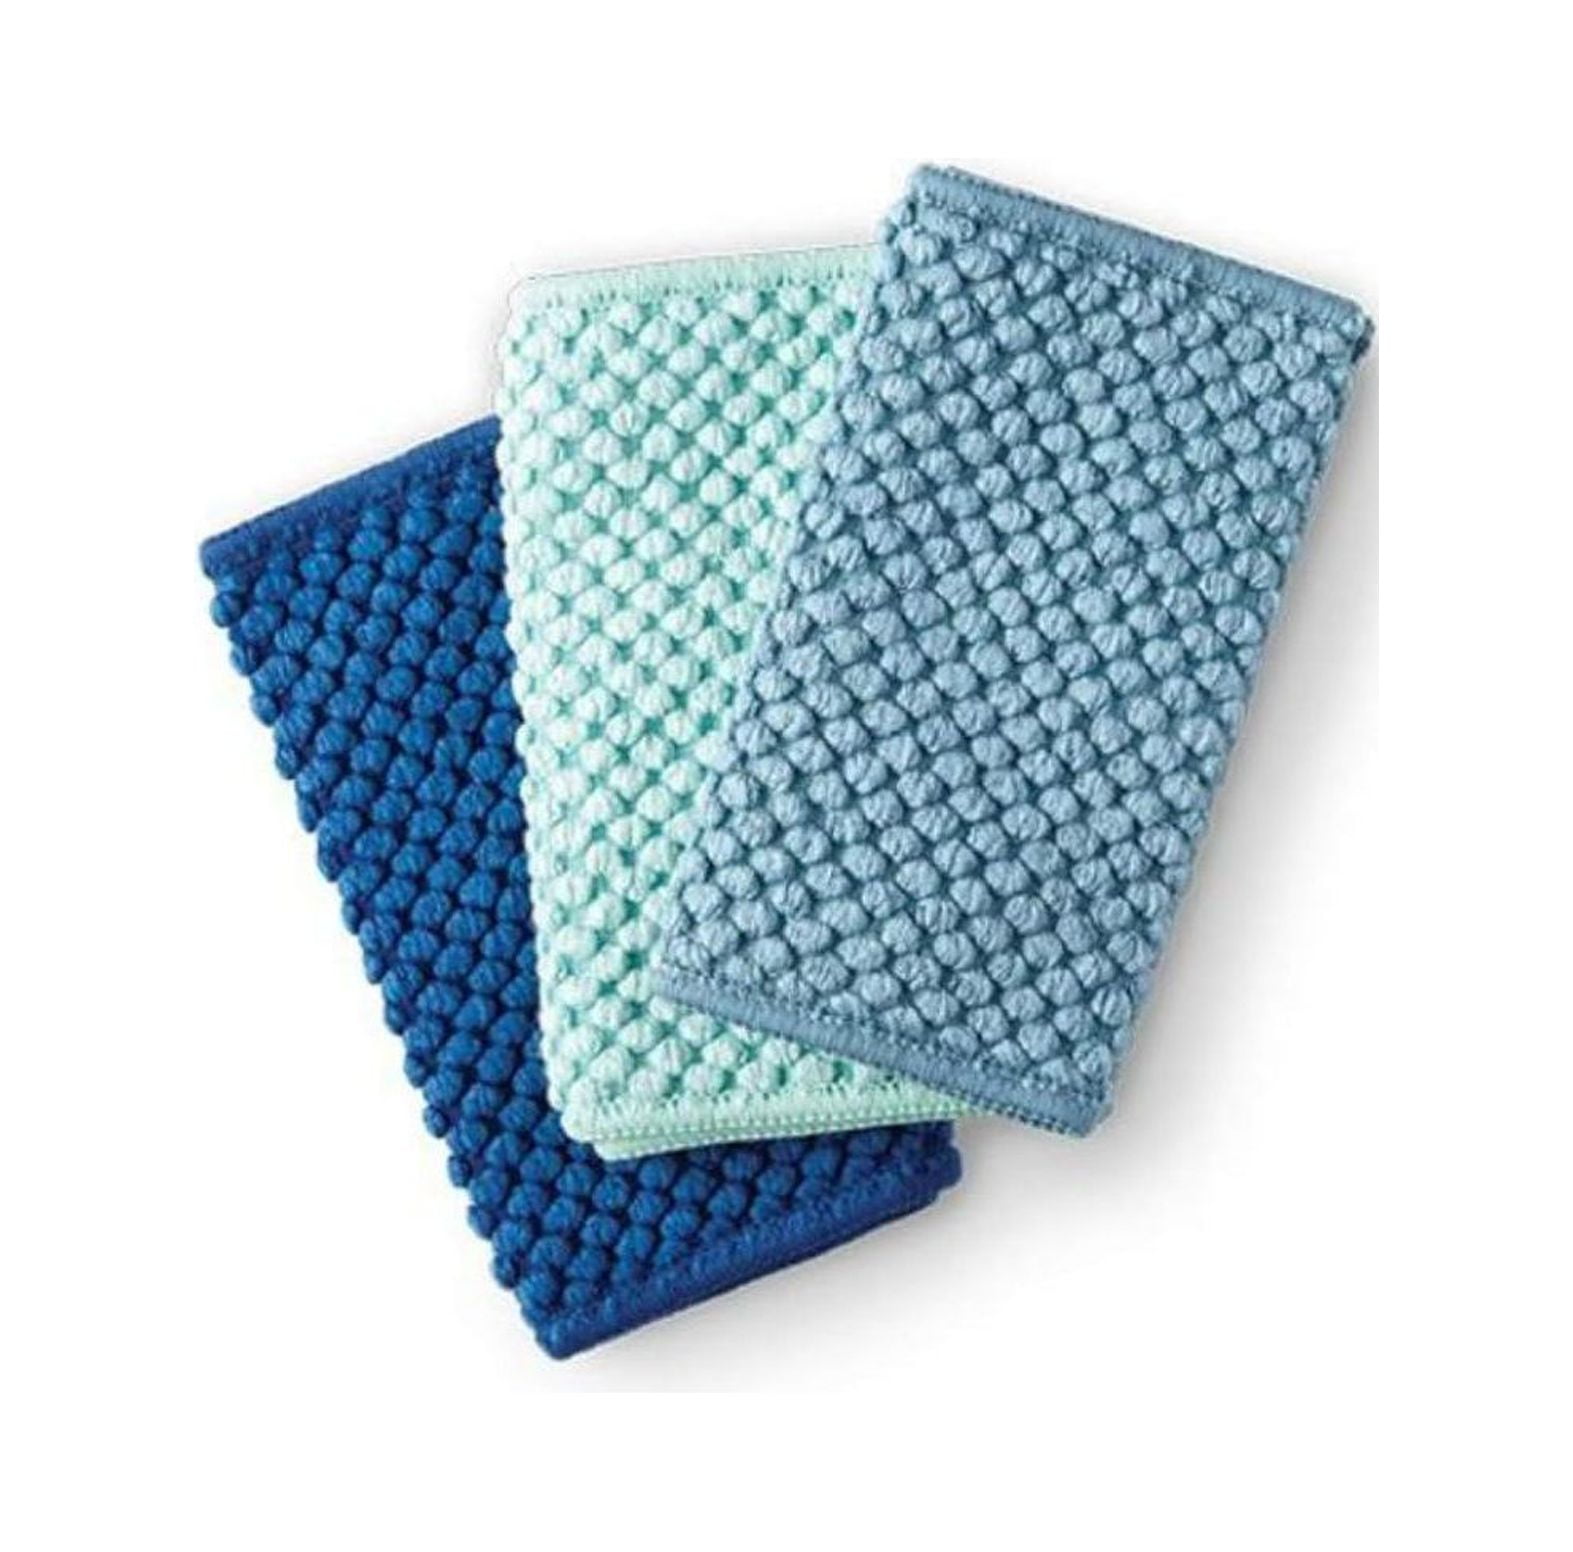 Norwex Products to Help You Live Zero Waste! - Little Green Cloth